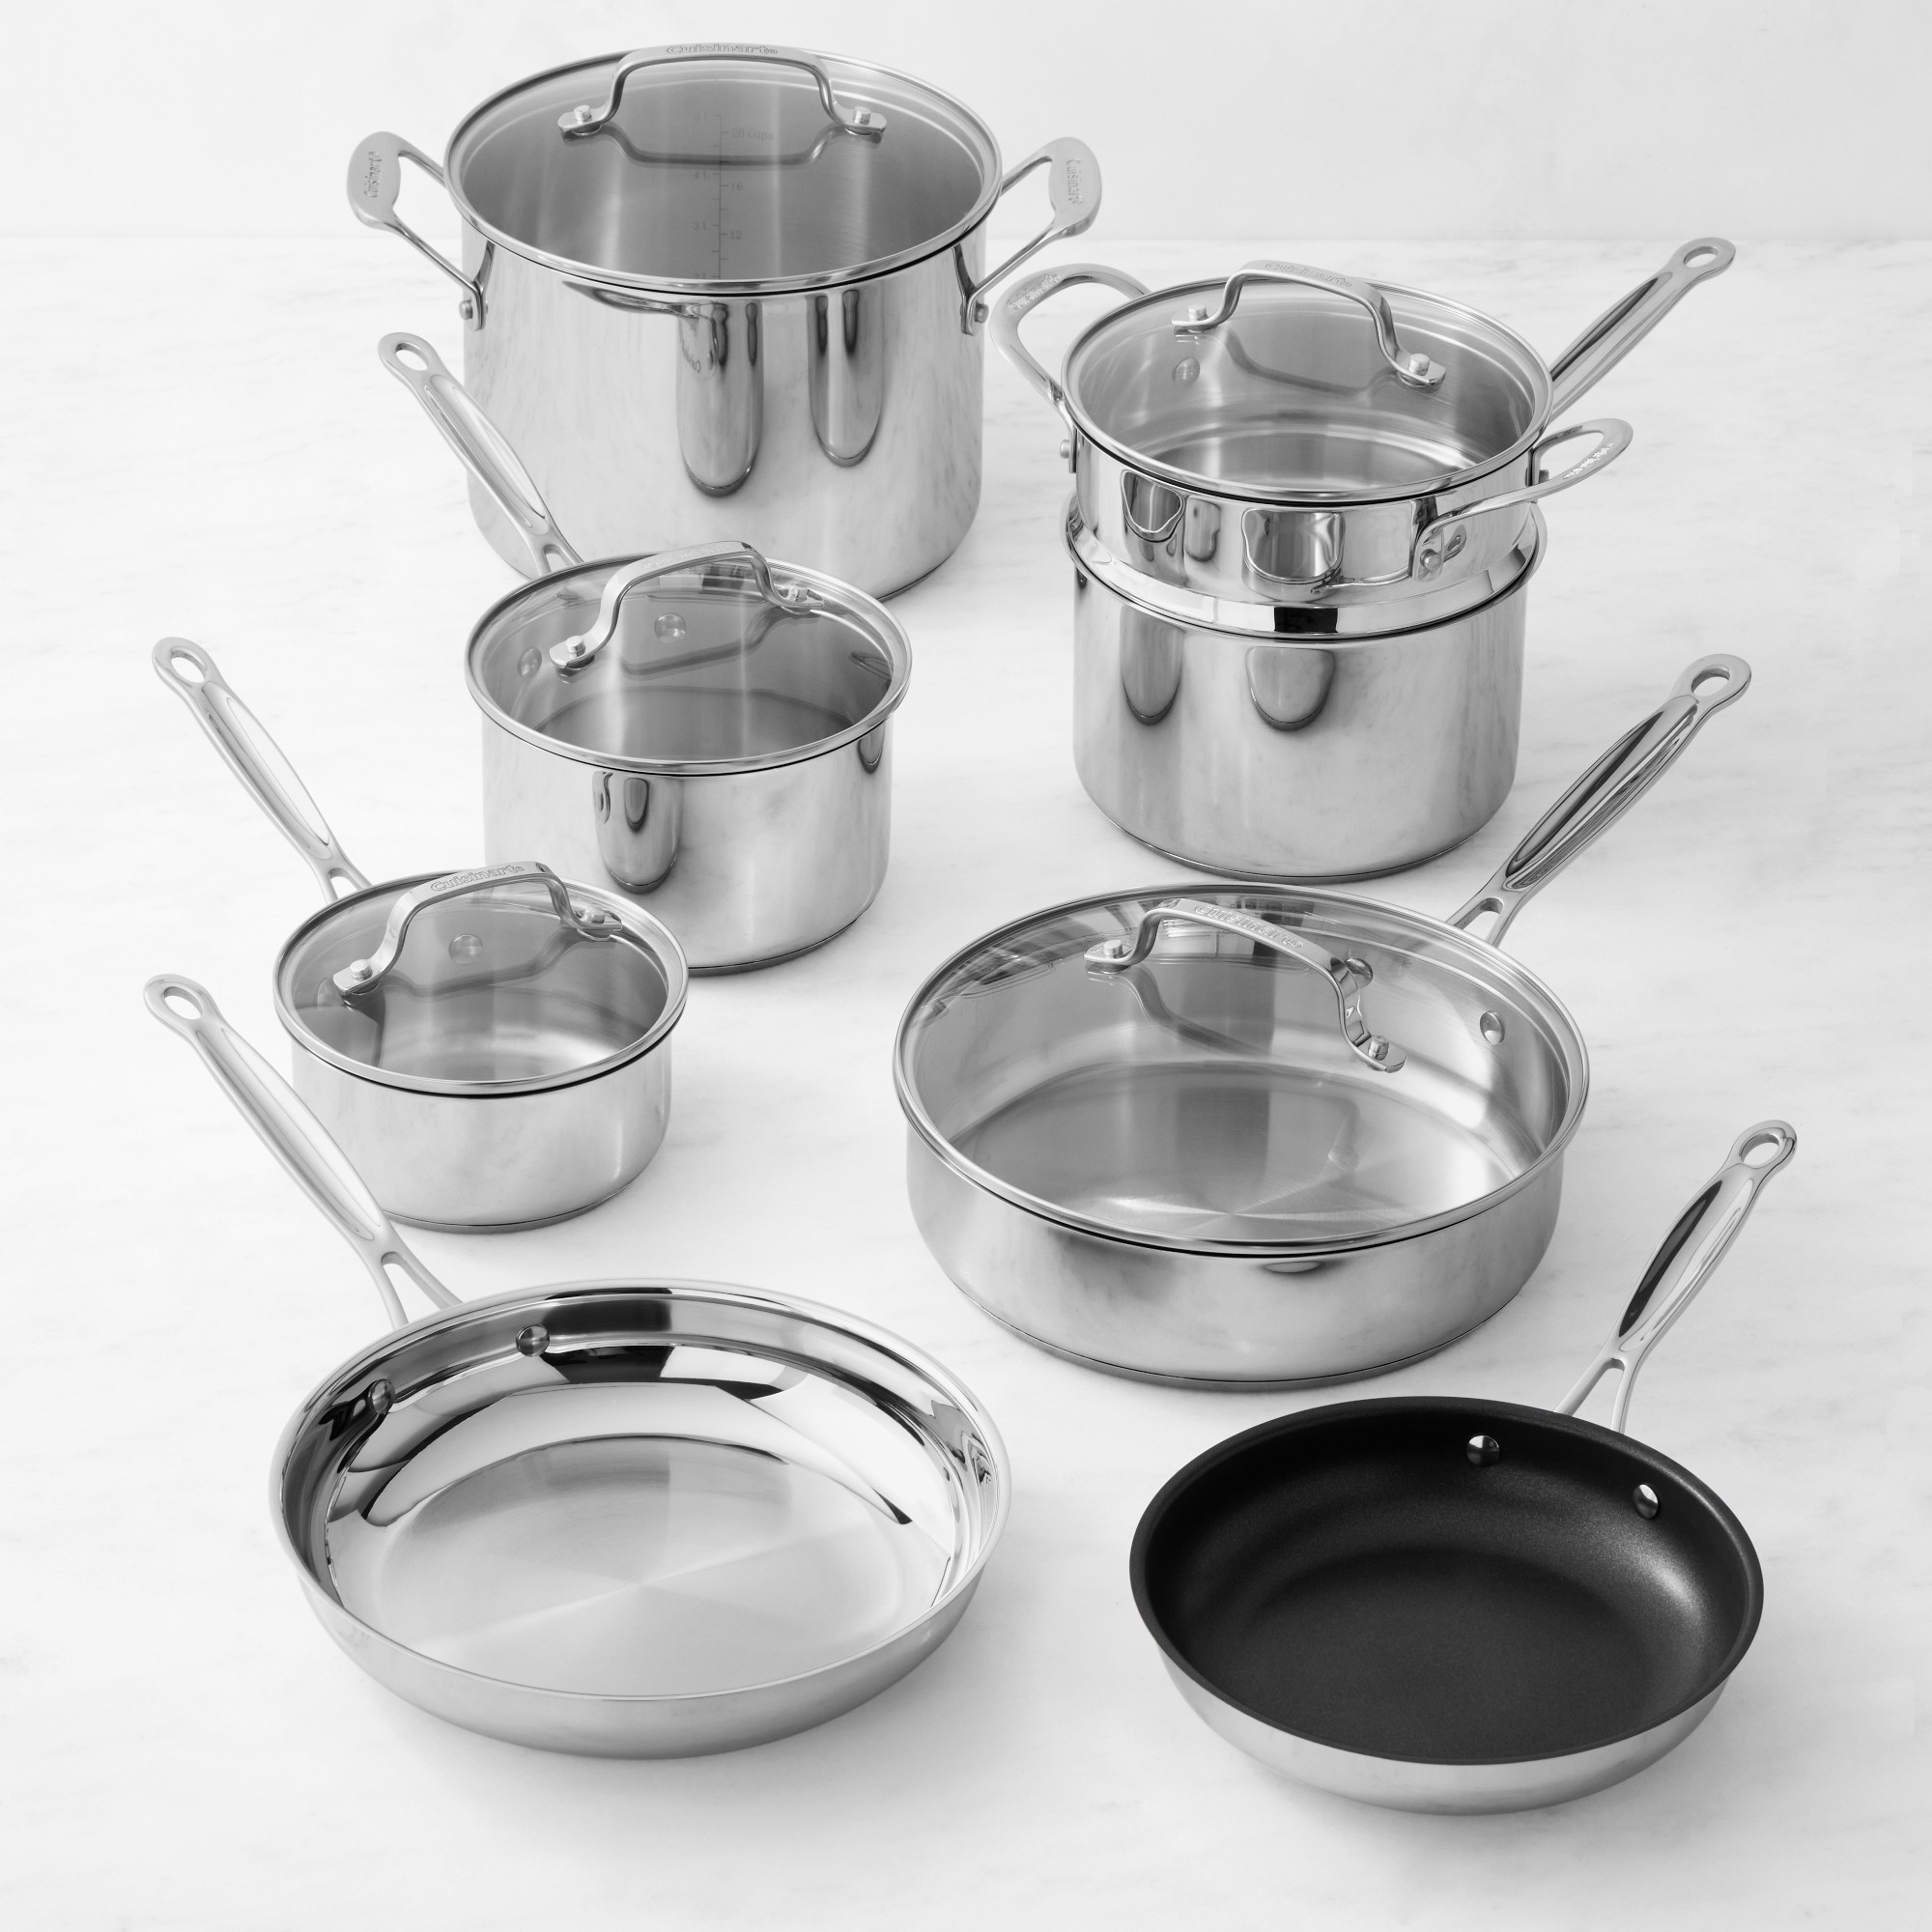 Cuisinart Chef's Classic Stainless-Steel 13-Piece Cookware Set